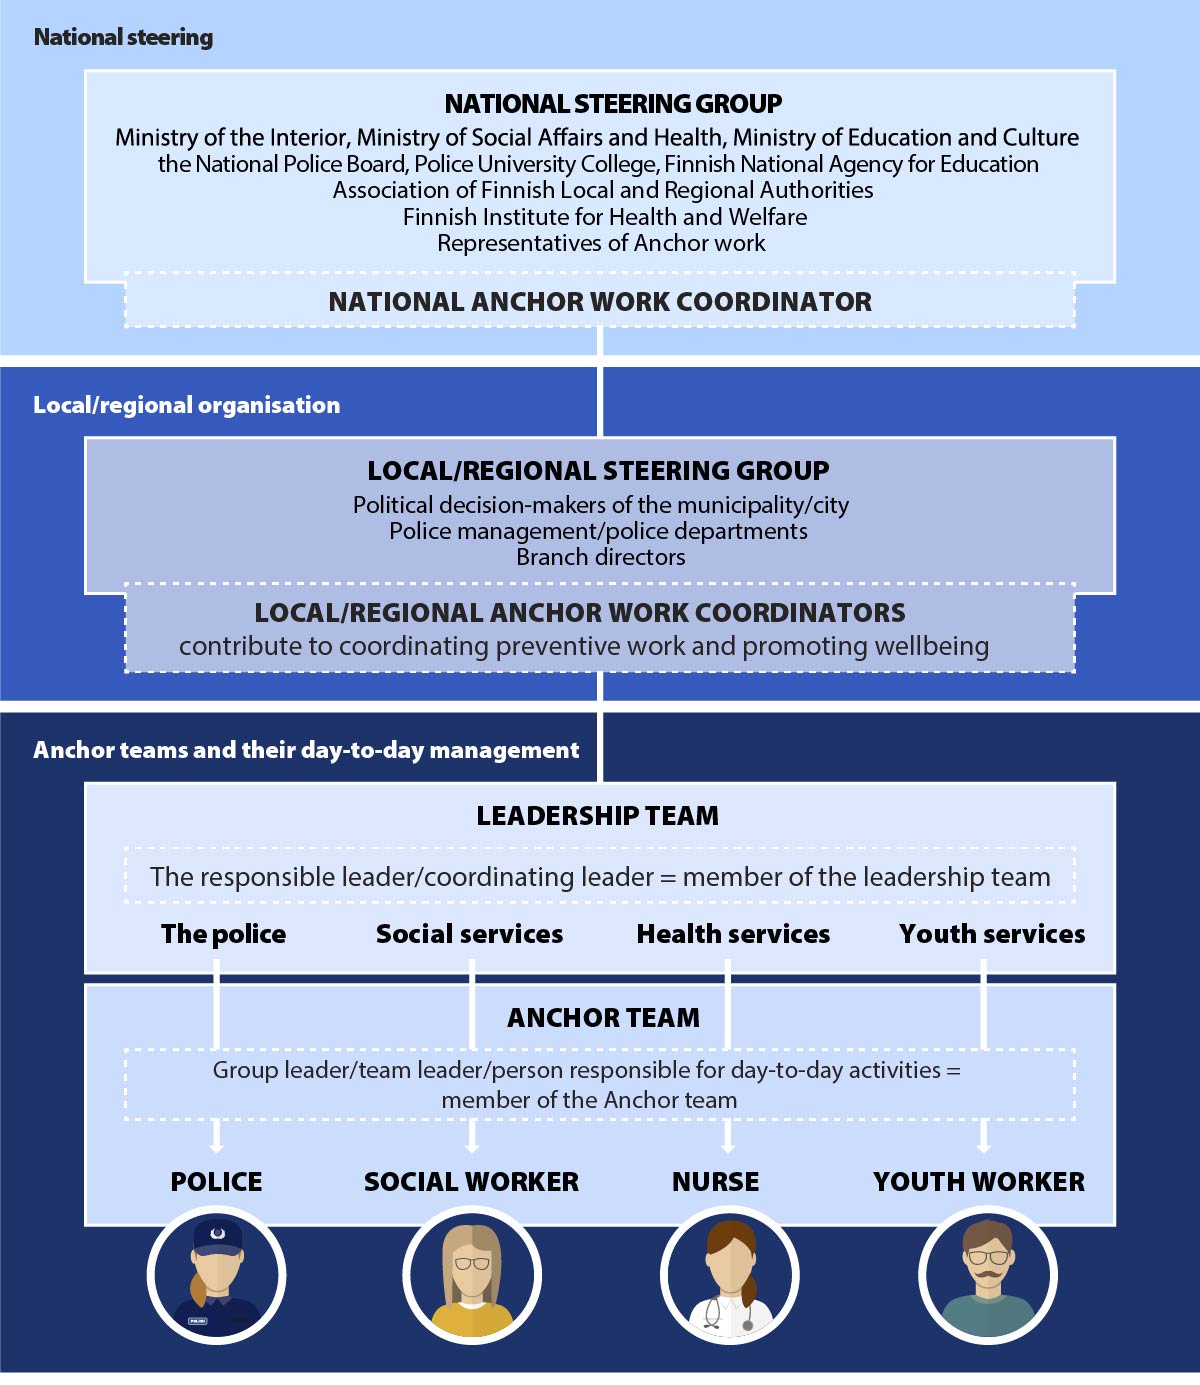 Figure 4 describes national guidance, local/regional organisation and the structure of the Anchor teams and their day-to-day management among different actors. The figure also describes the job description of the coordinators of national and local/regional Anchor work.